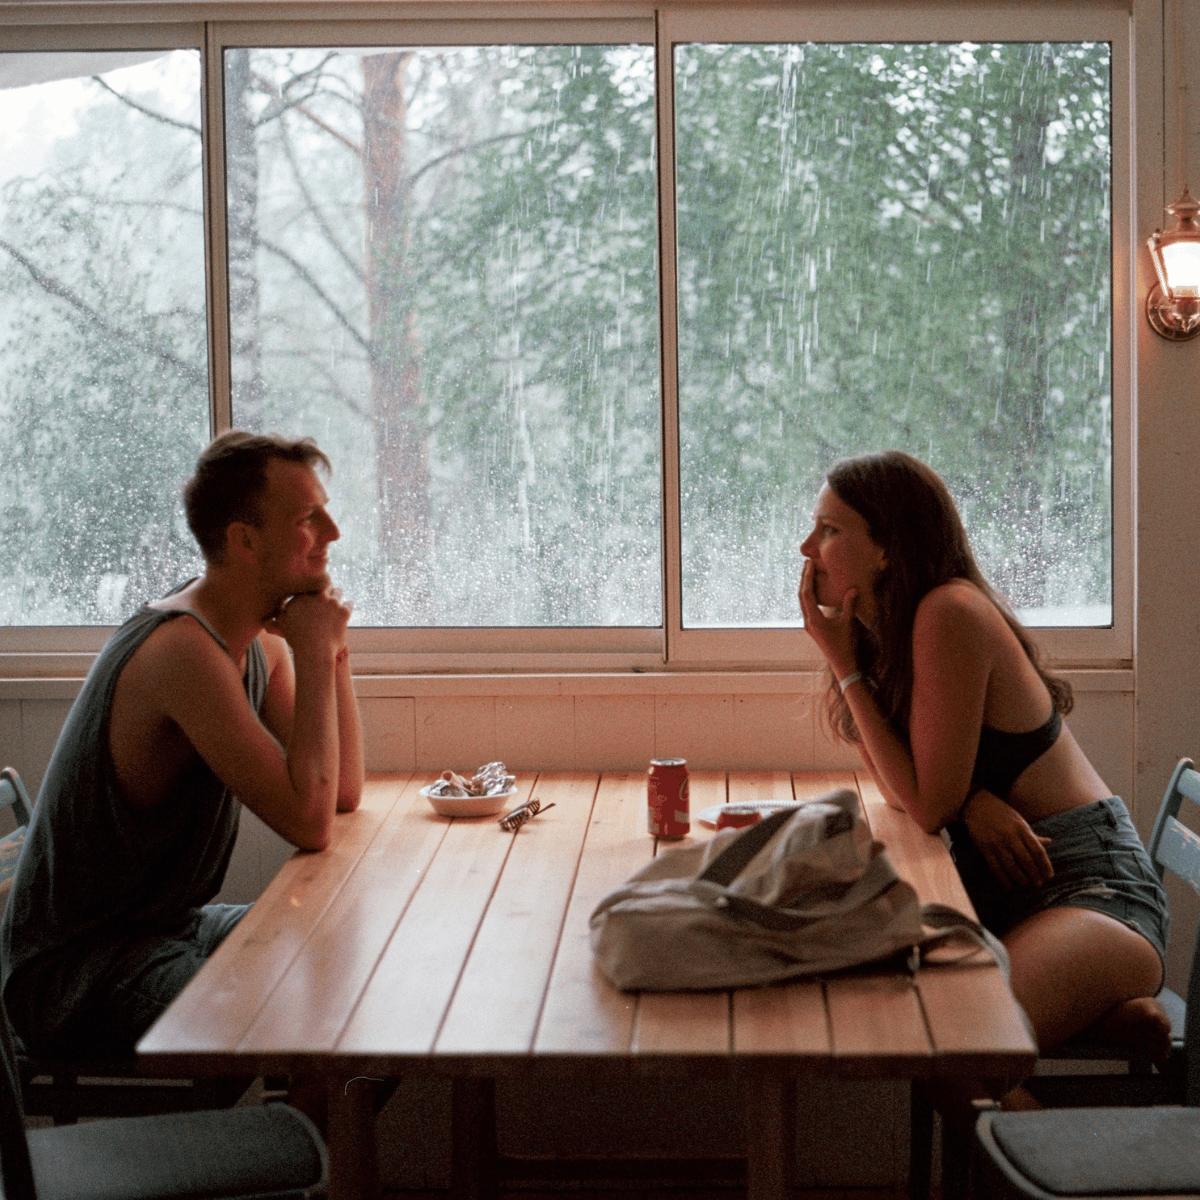 Coupel on a date, with rain in the background